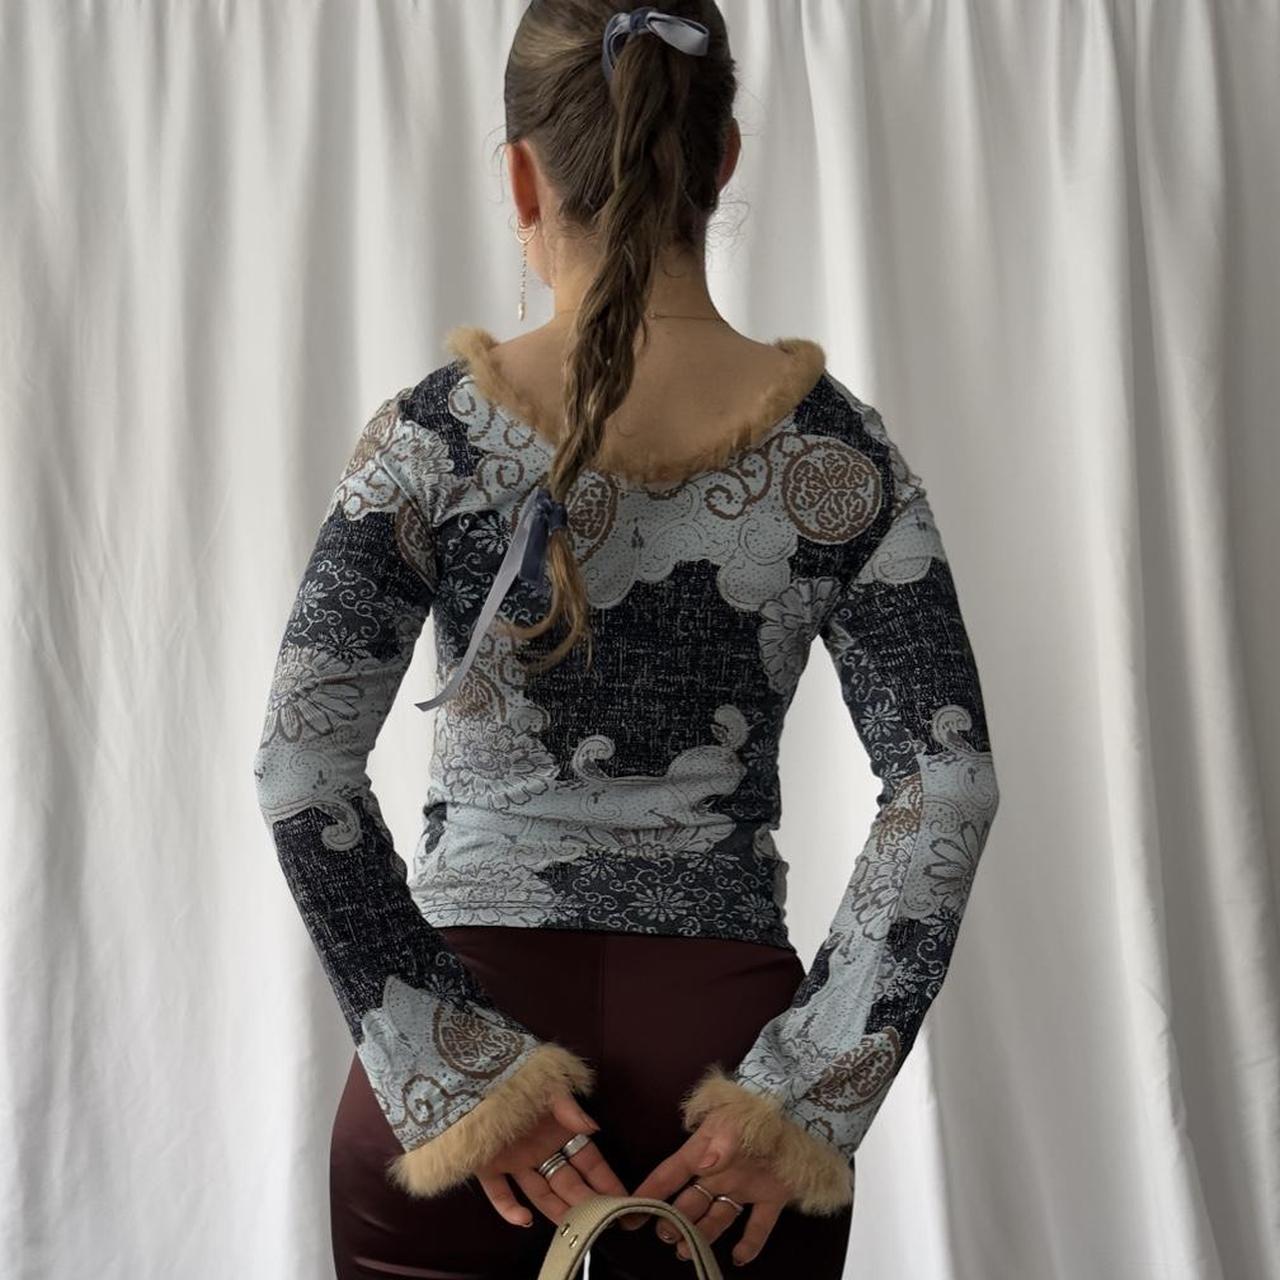 90s long sleeve top with fur trims with abstract print